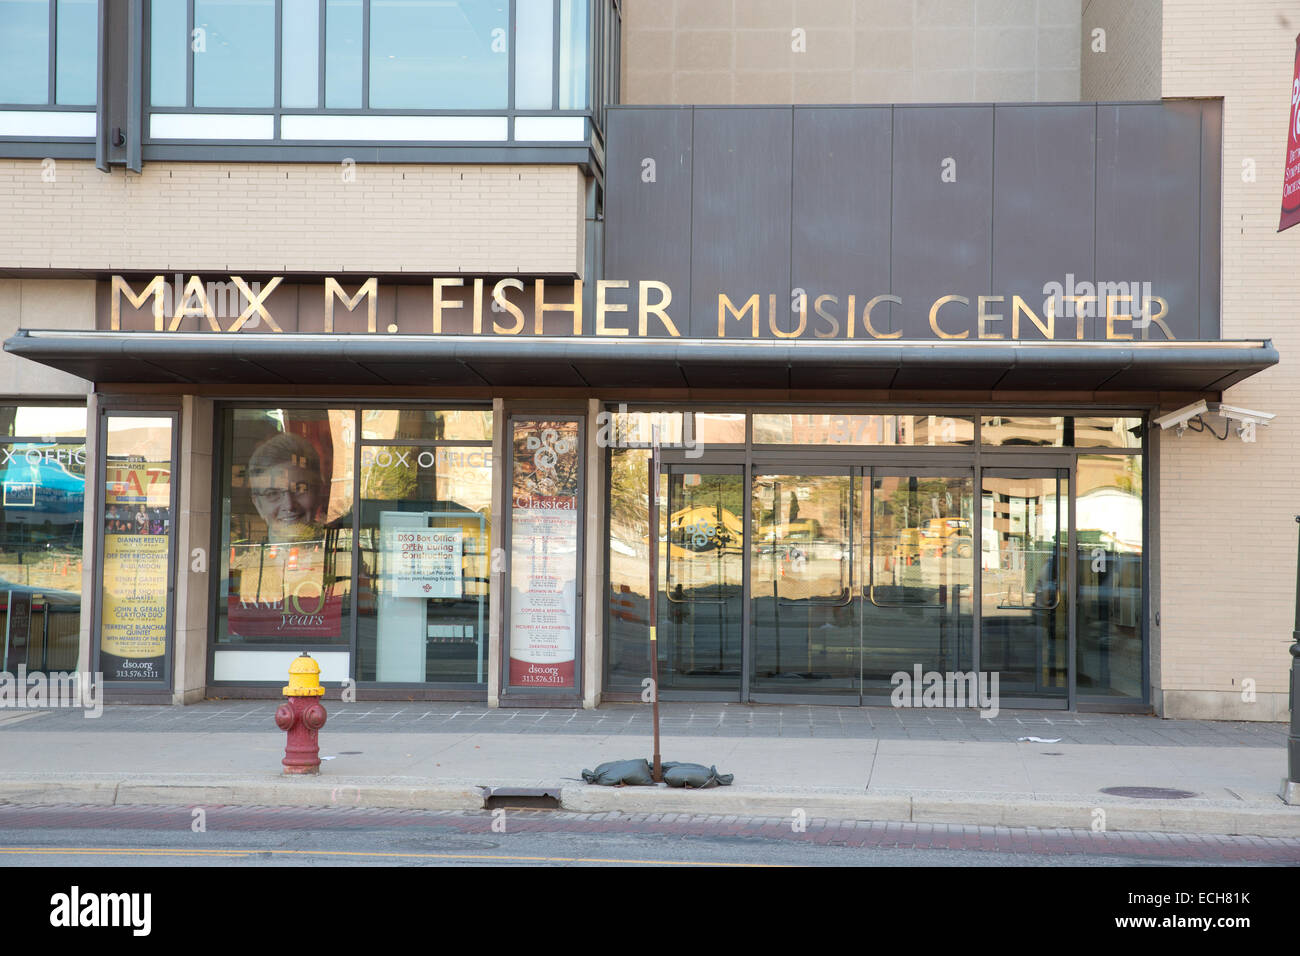 The Detroit Symphony Orchestra, Max M. Fisher Music Center, Detroit, Michigan, USA. Oct. 23, 2014. Stock Photo